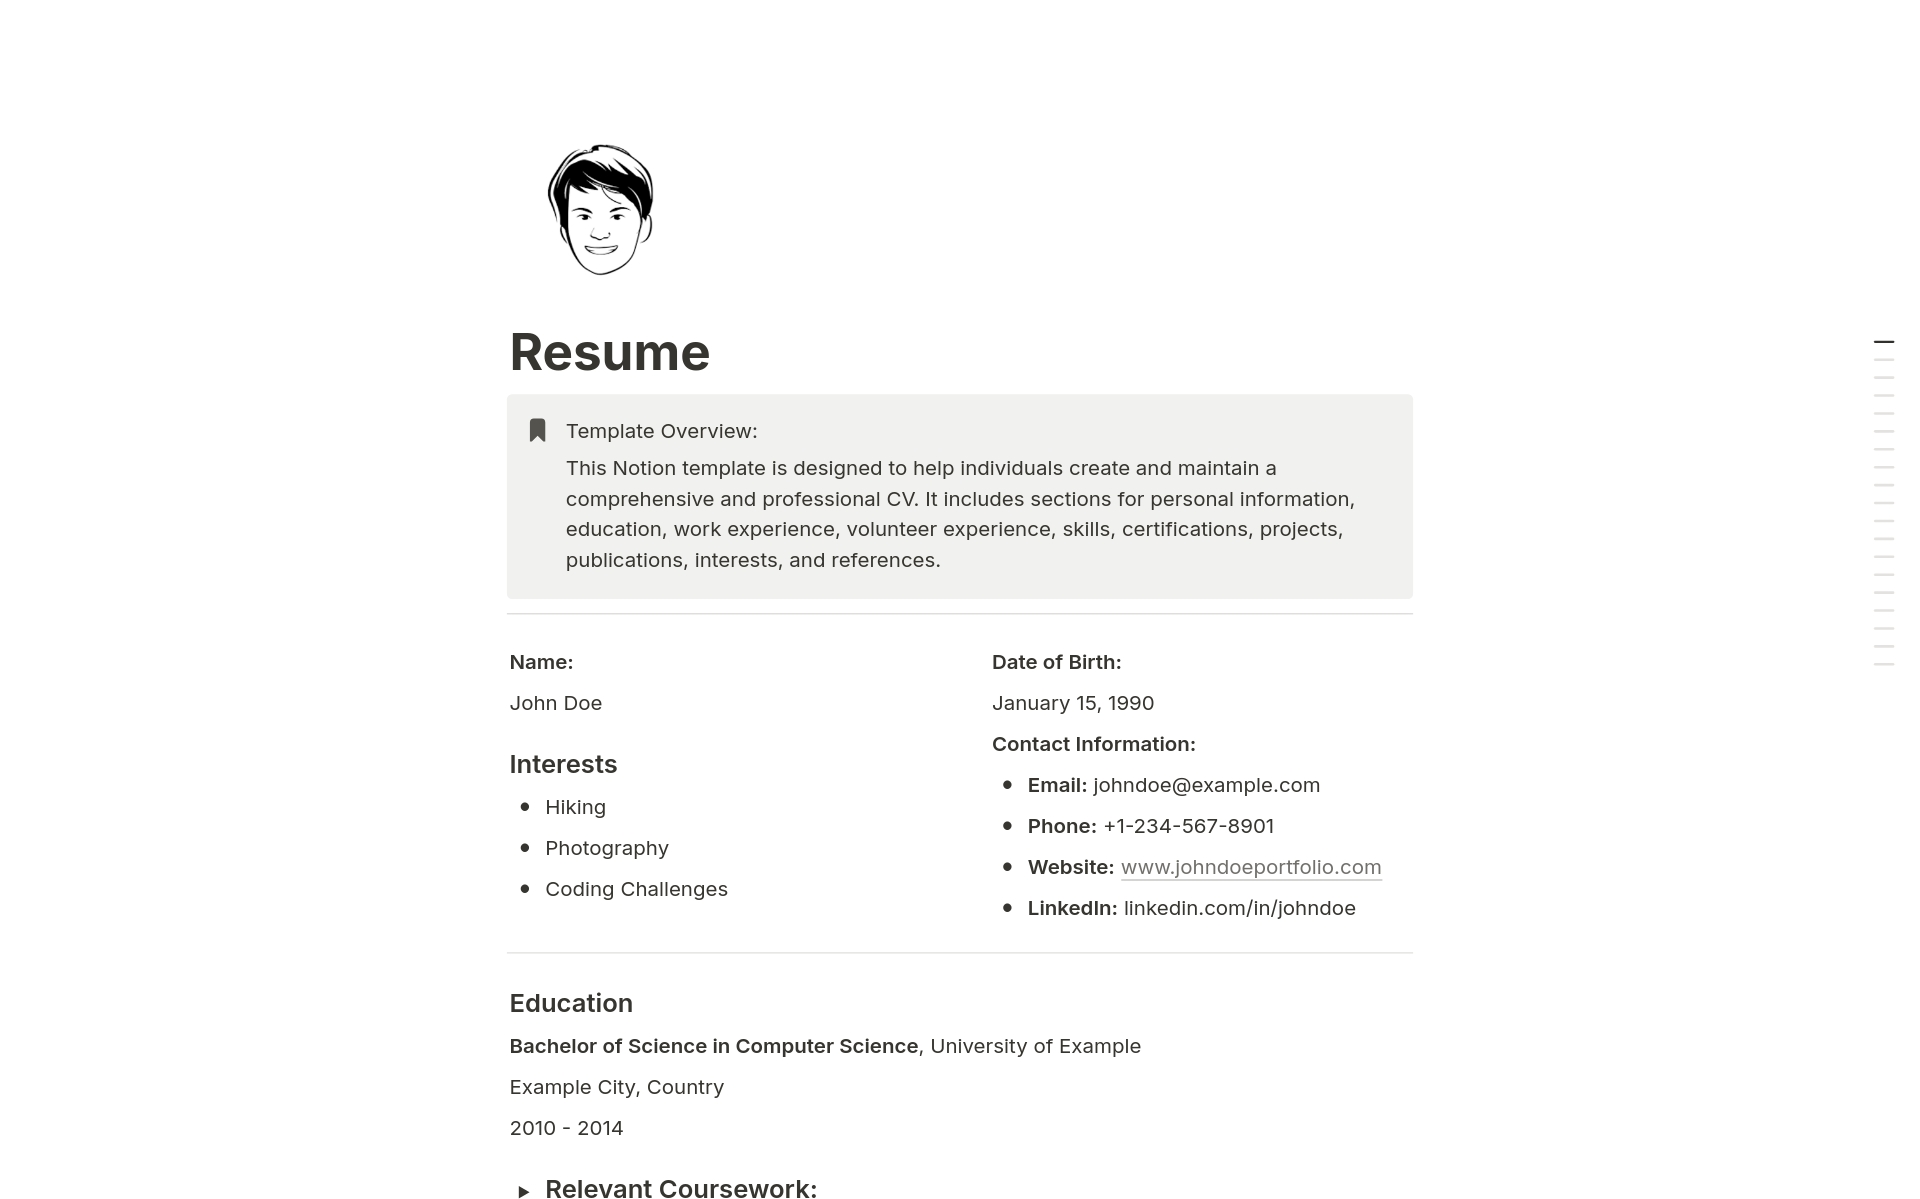 Get noticed and land your dream job with our Resume Template. Create a polished and professional resume that showcases your strengths. Ready to make your next career move? 